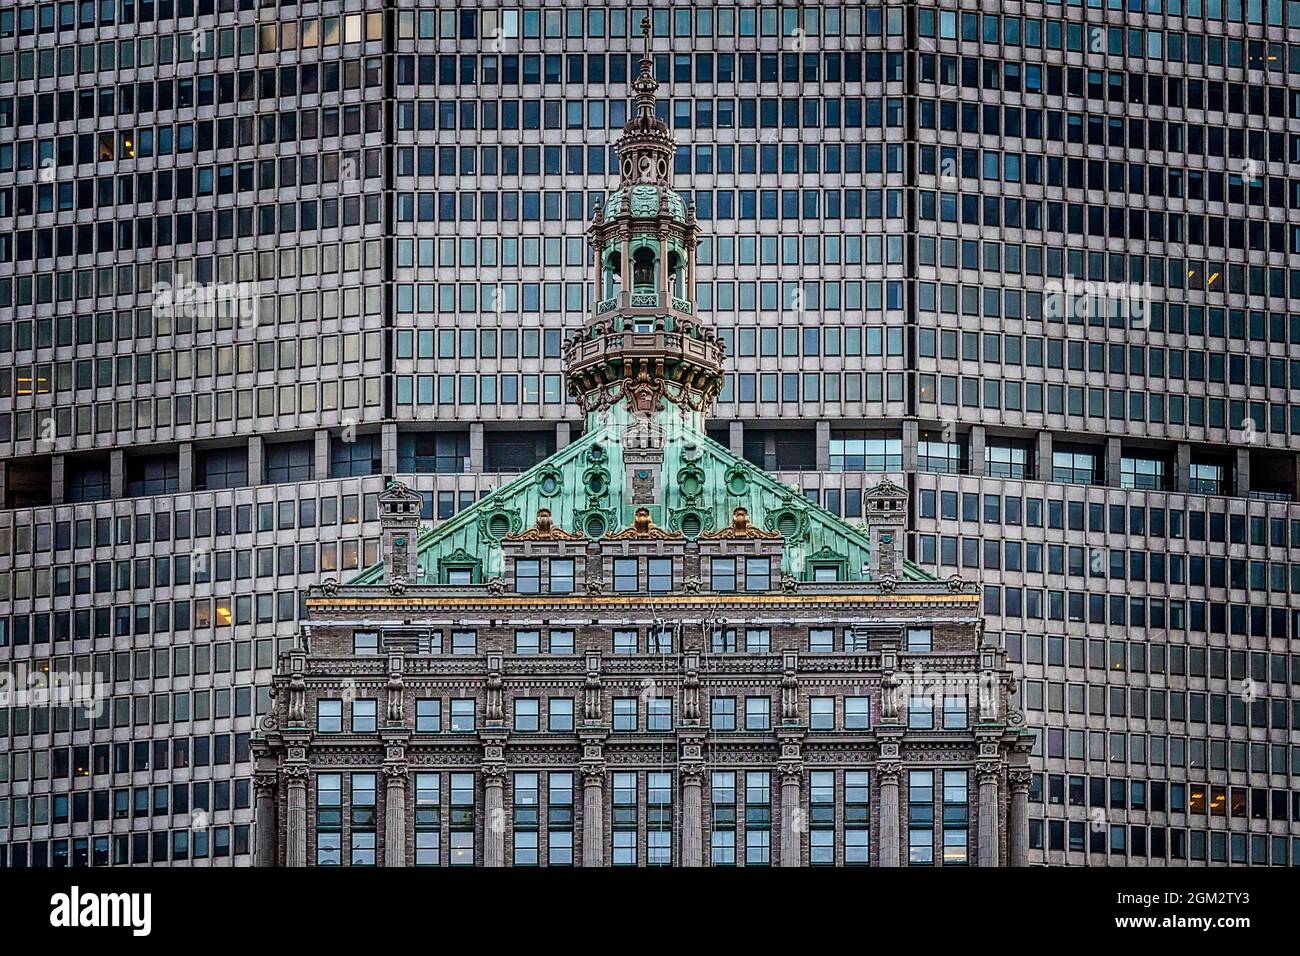 Hemsley Building Tower NYC - View to the ornate cupola of the iconic New York City Landmark. The pyramidal shape top of the Hemsley Building is locate Stock Photo